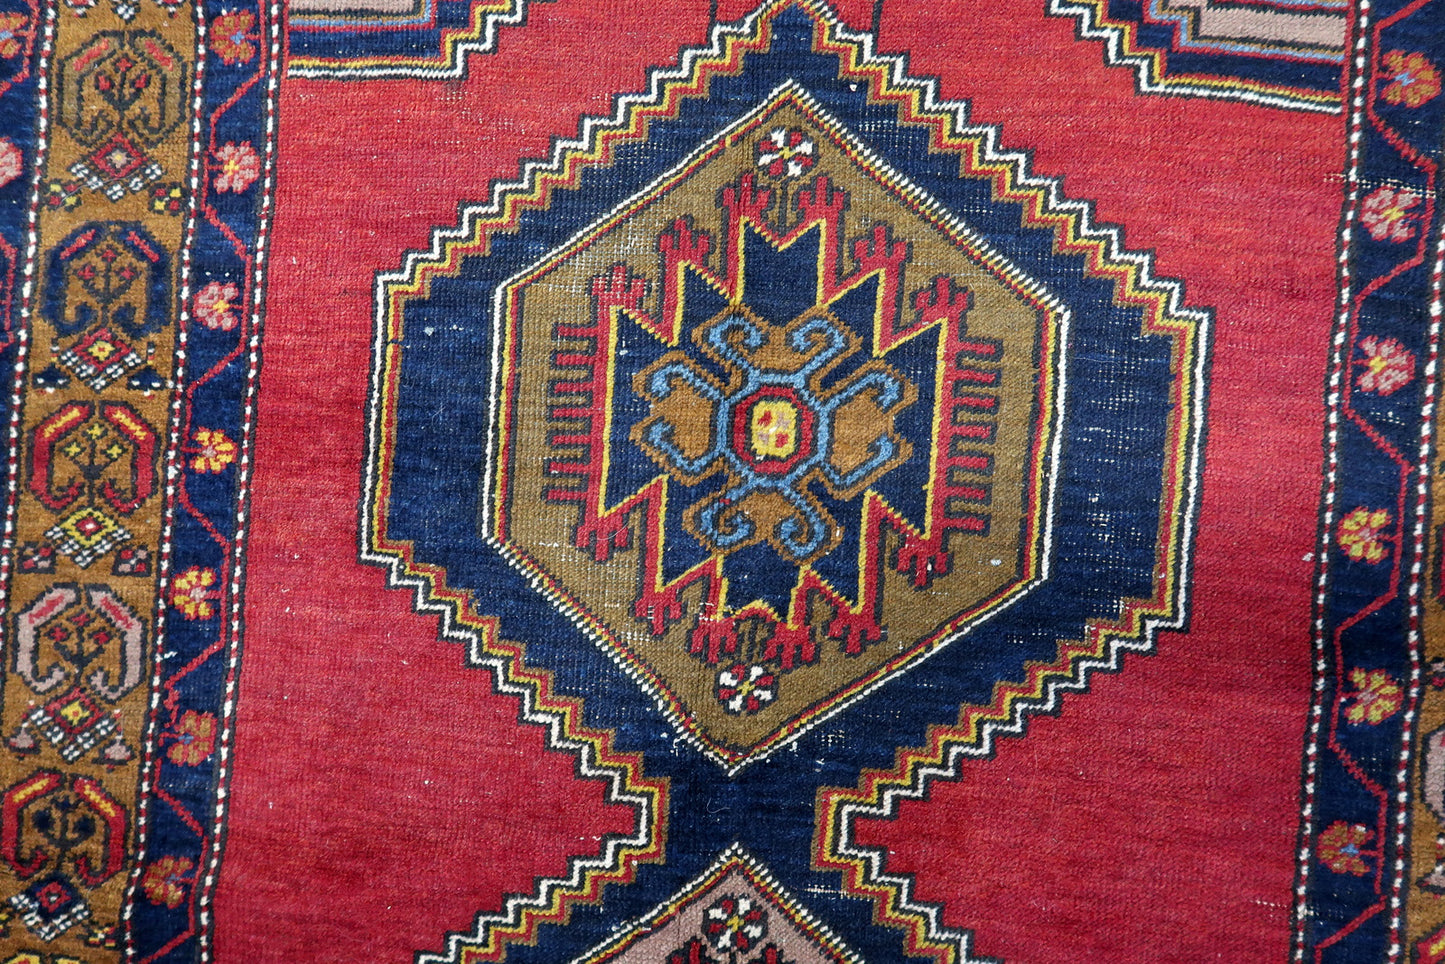 Detailed view of the complex patterns in the border, showcasing the harmonious blend of colors